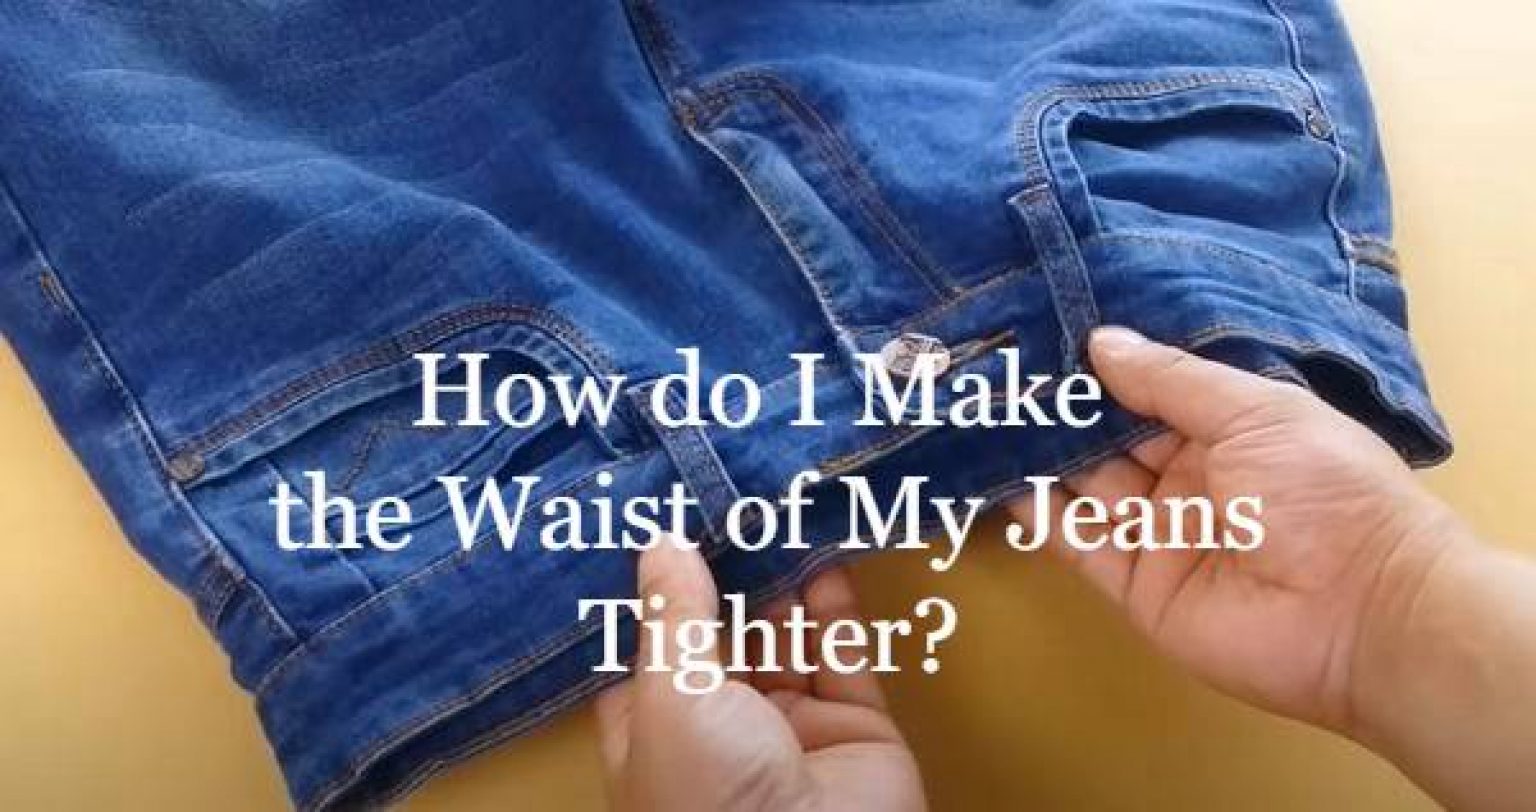 How to Tighten Jeans without Belt? | Style Jeans Wear How To Make Your Jeans Tighter Without A Belt